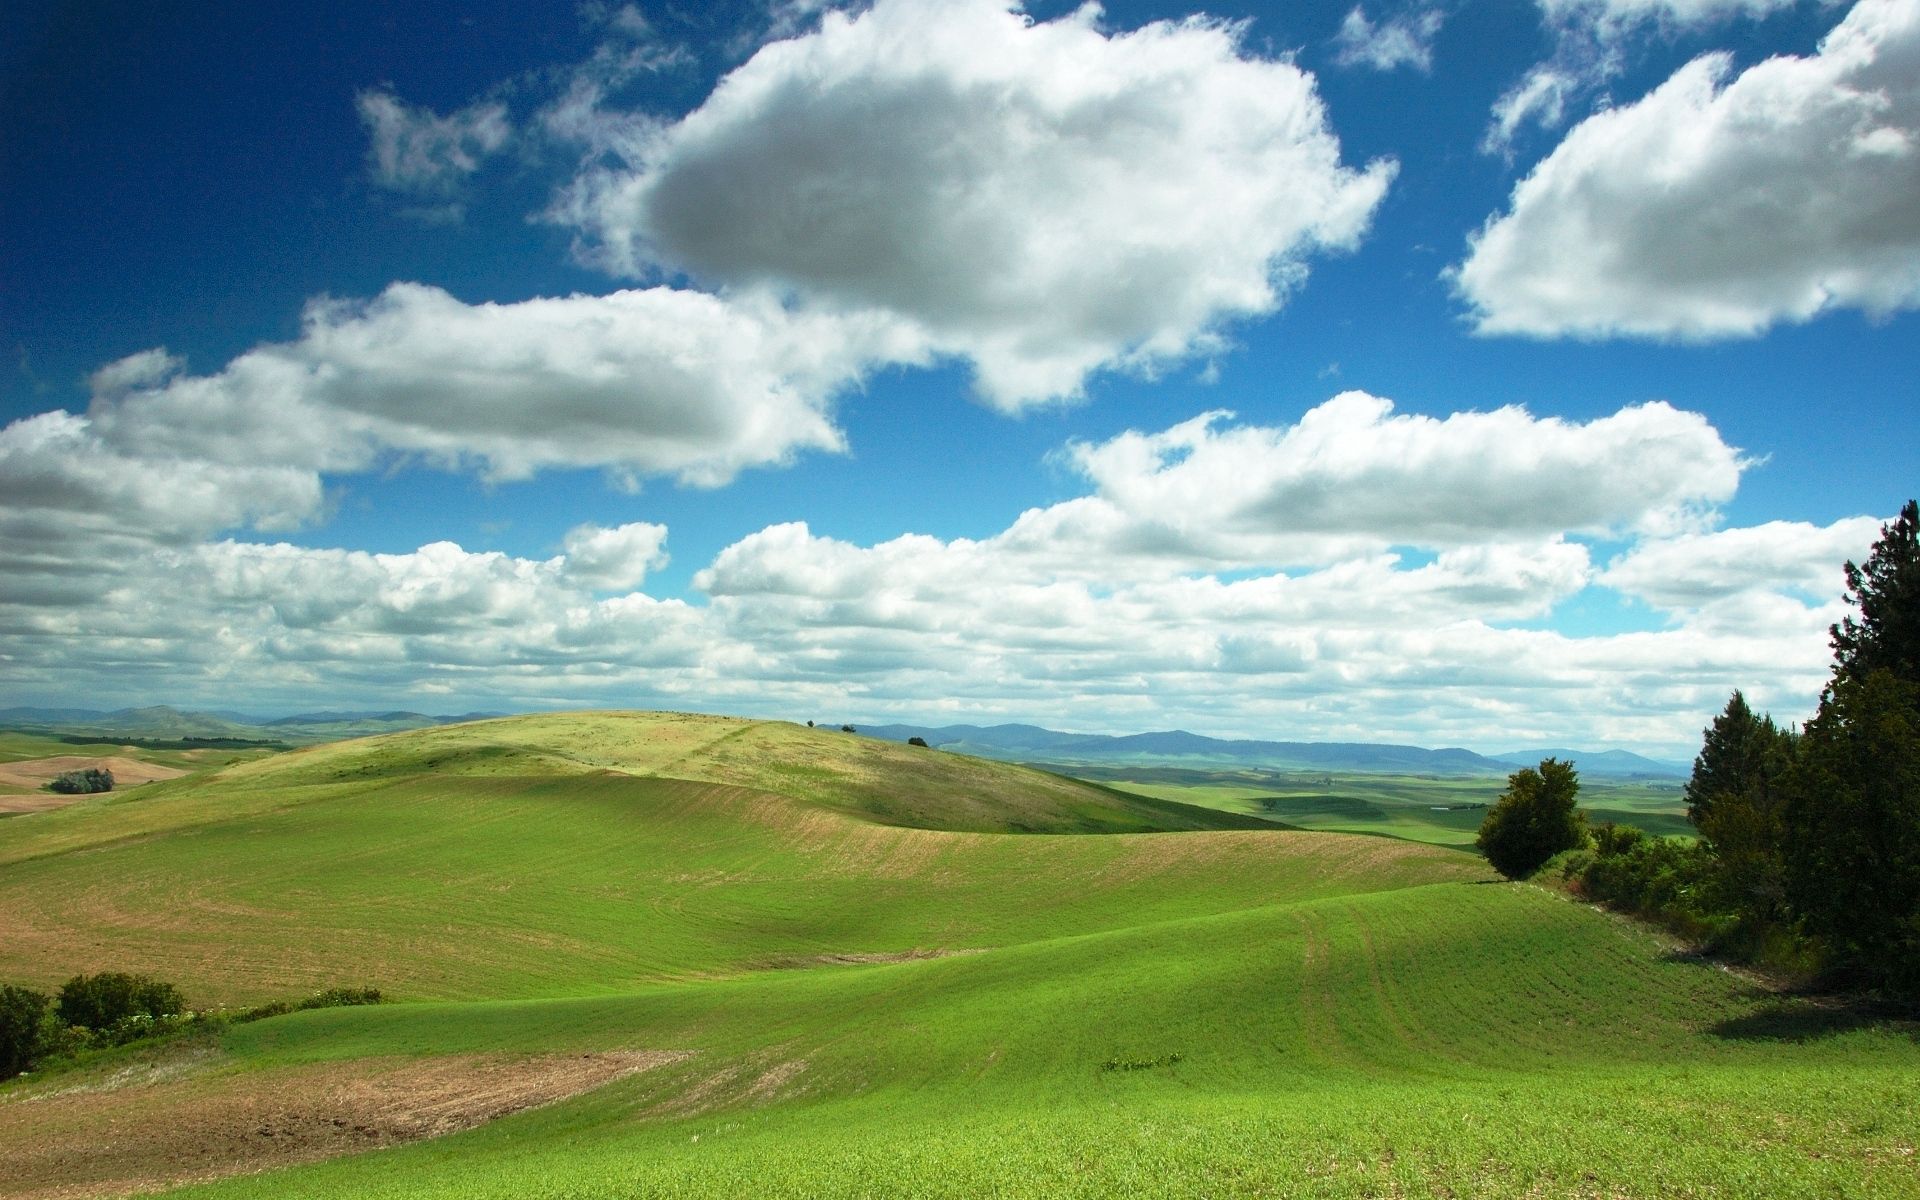 android hills, landscape, nature, clouds, field